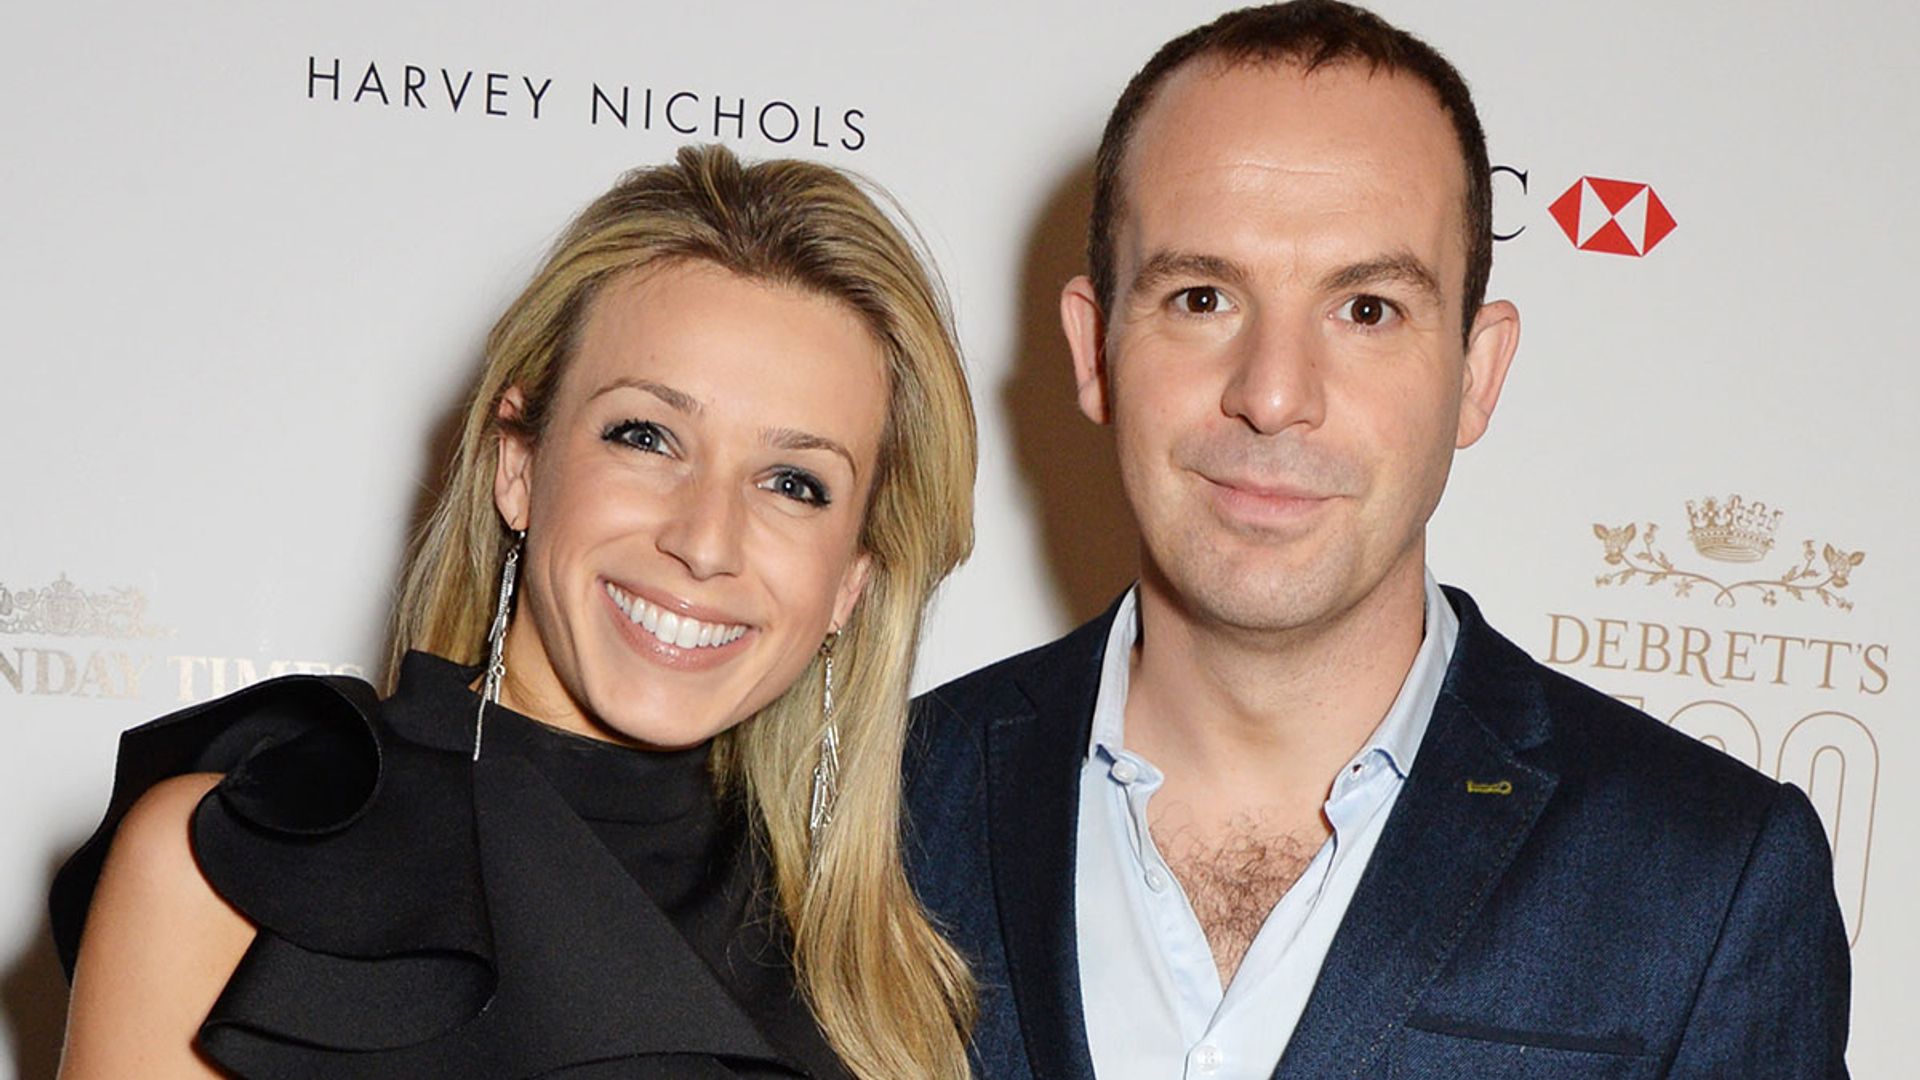 Martin Lewis makes heartfelt comment about daughter